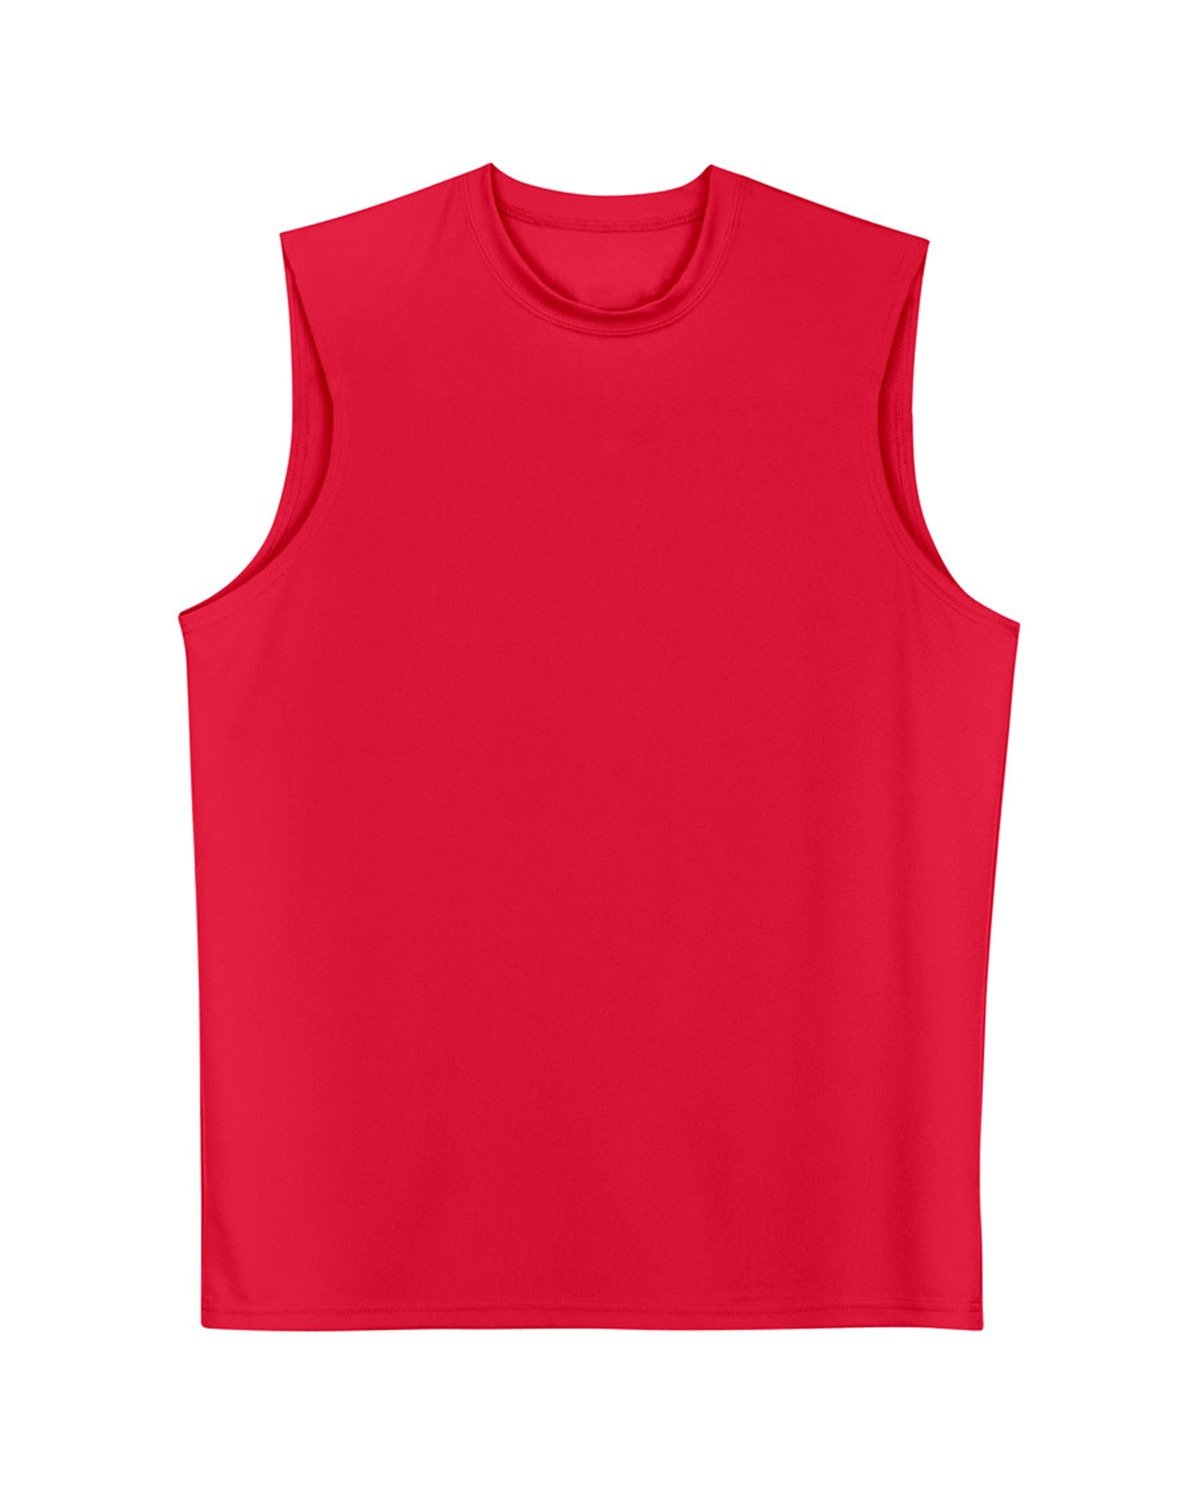 A4 Men's Cooling Performance Muscle T-Shirt SCARLET 